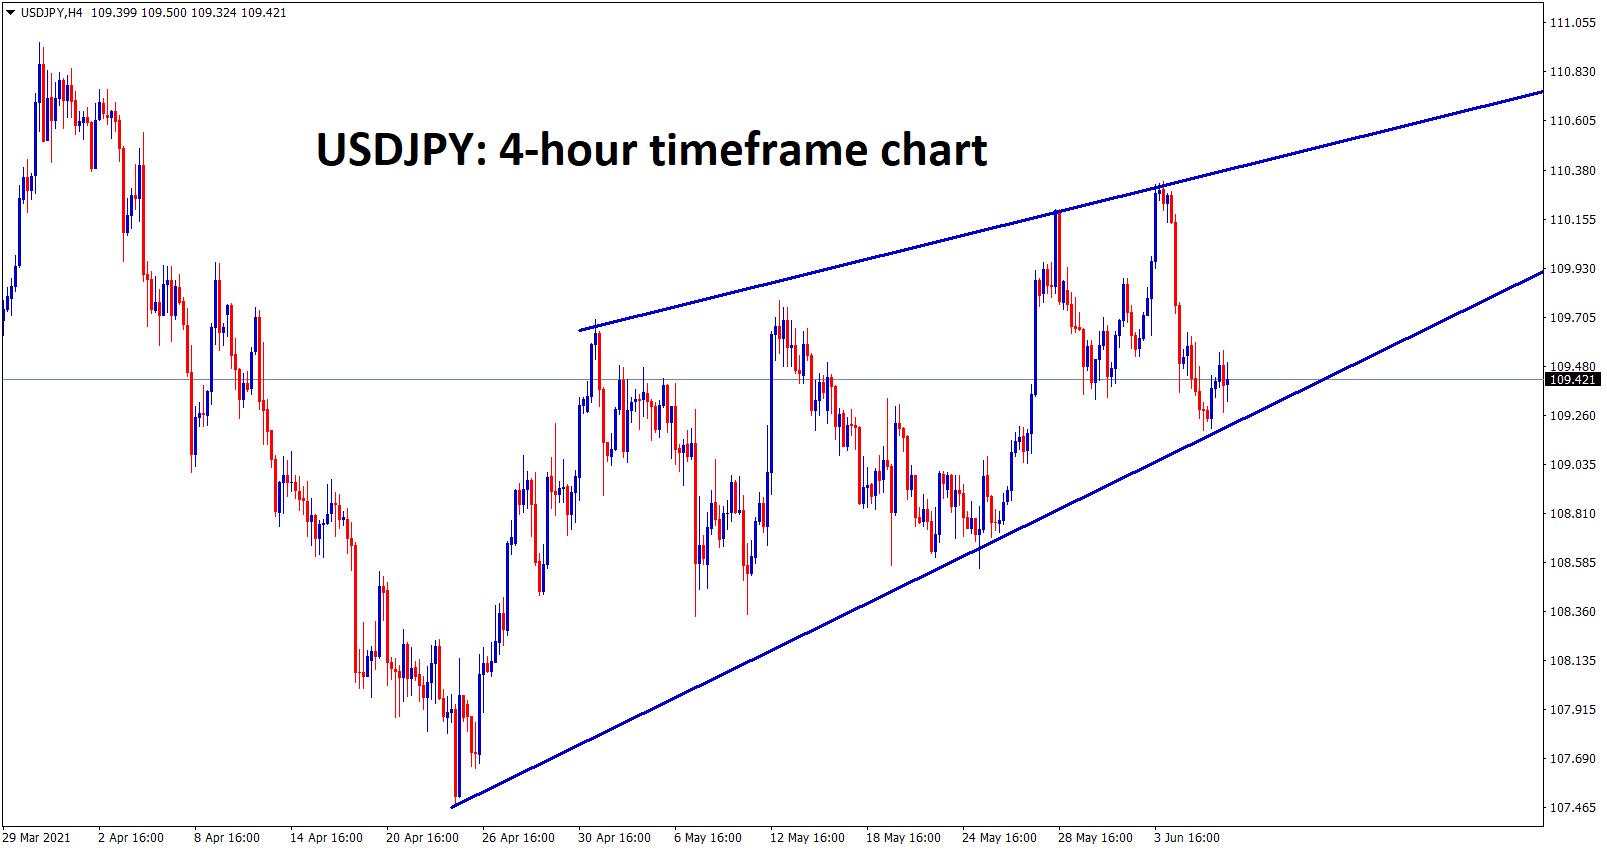 USDJPY is at the bottom level of the rising wedge pattern